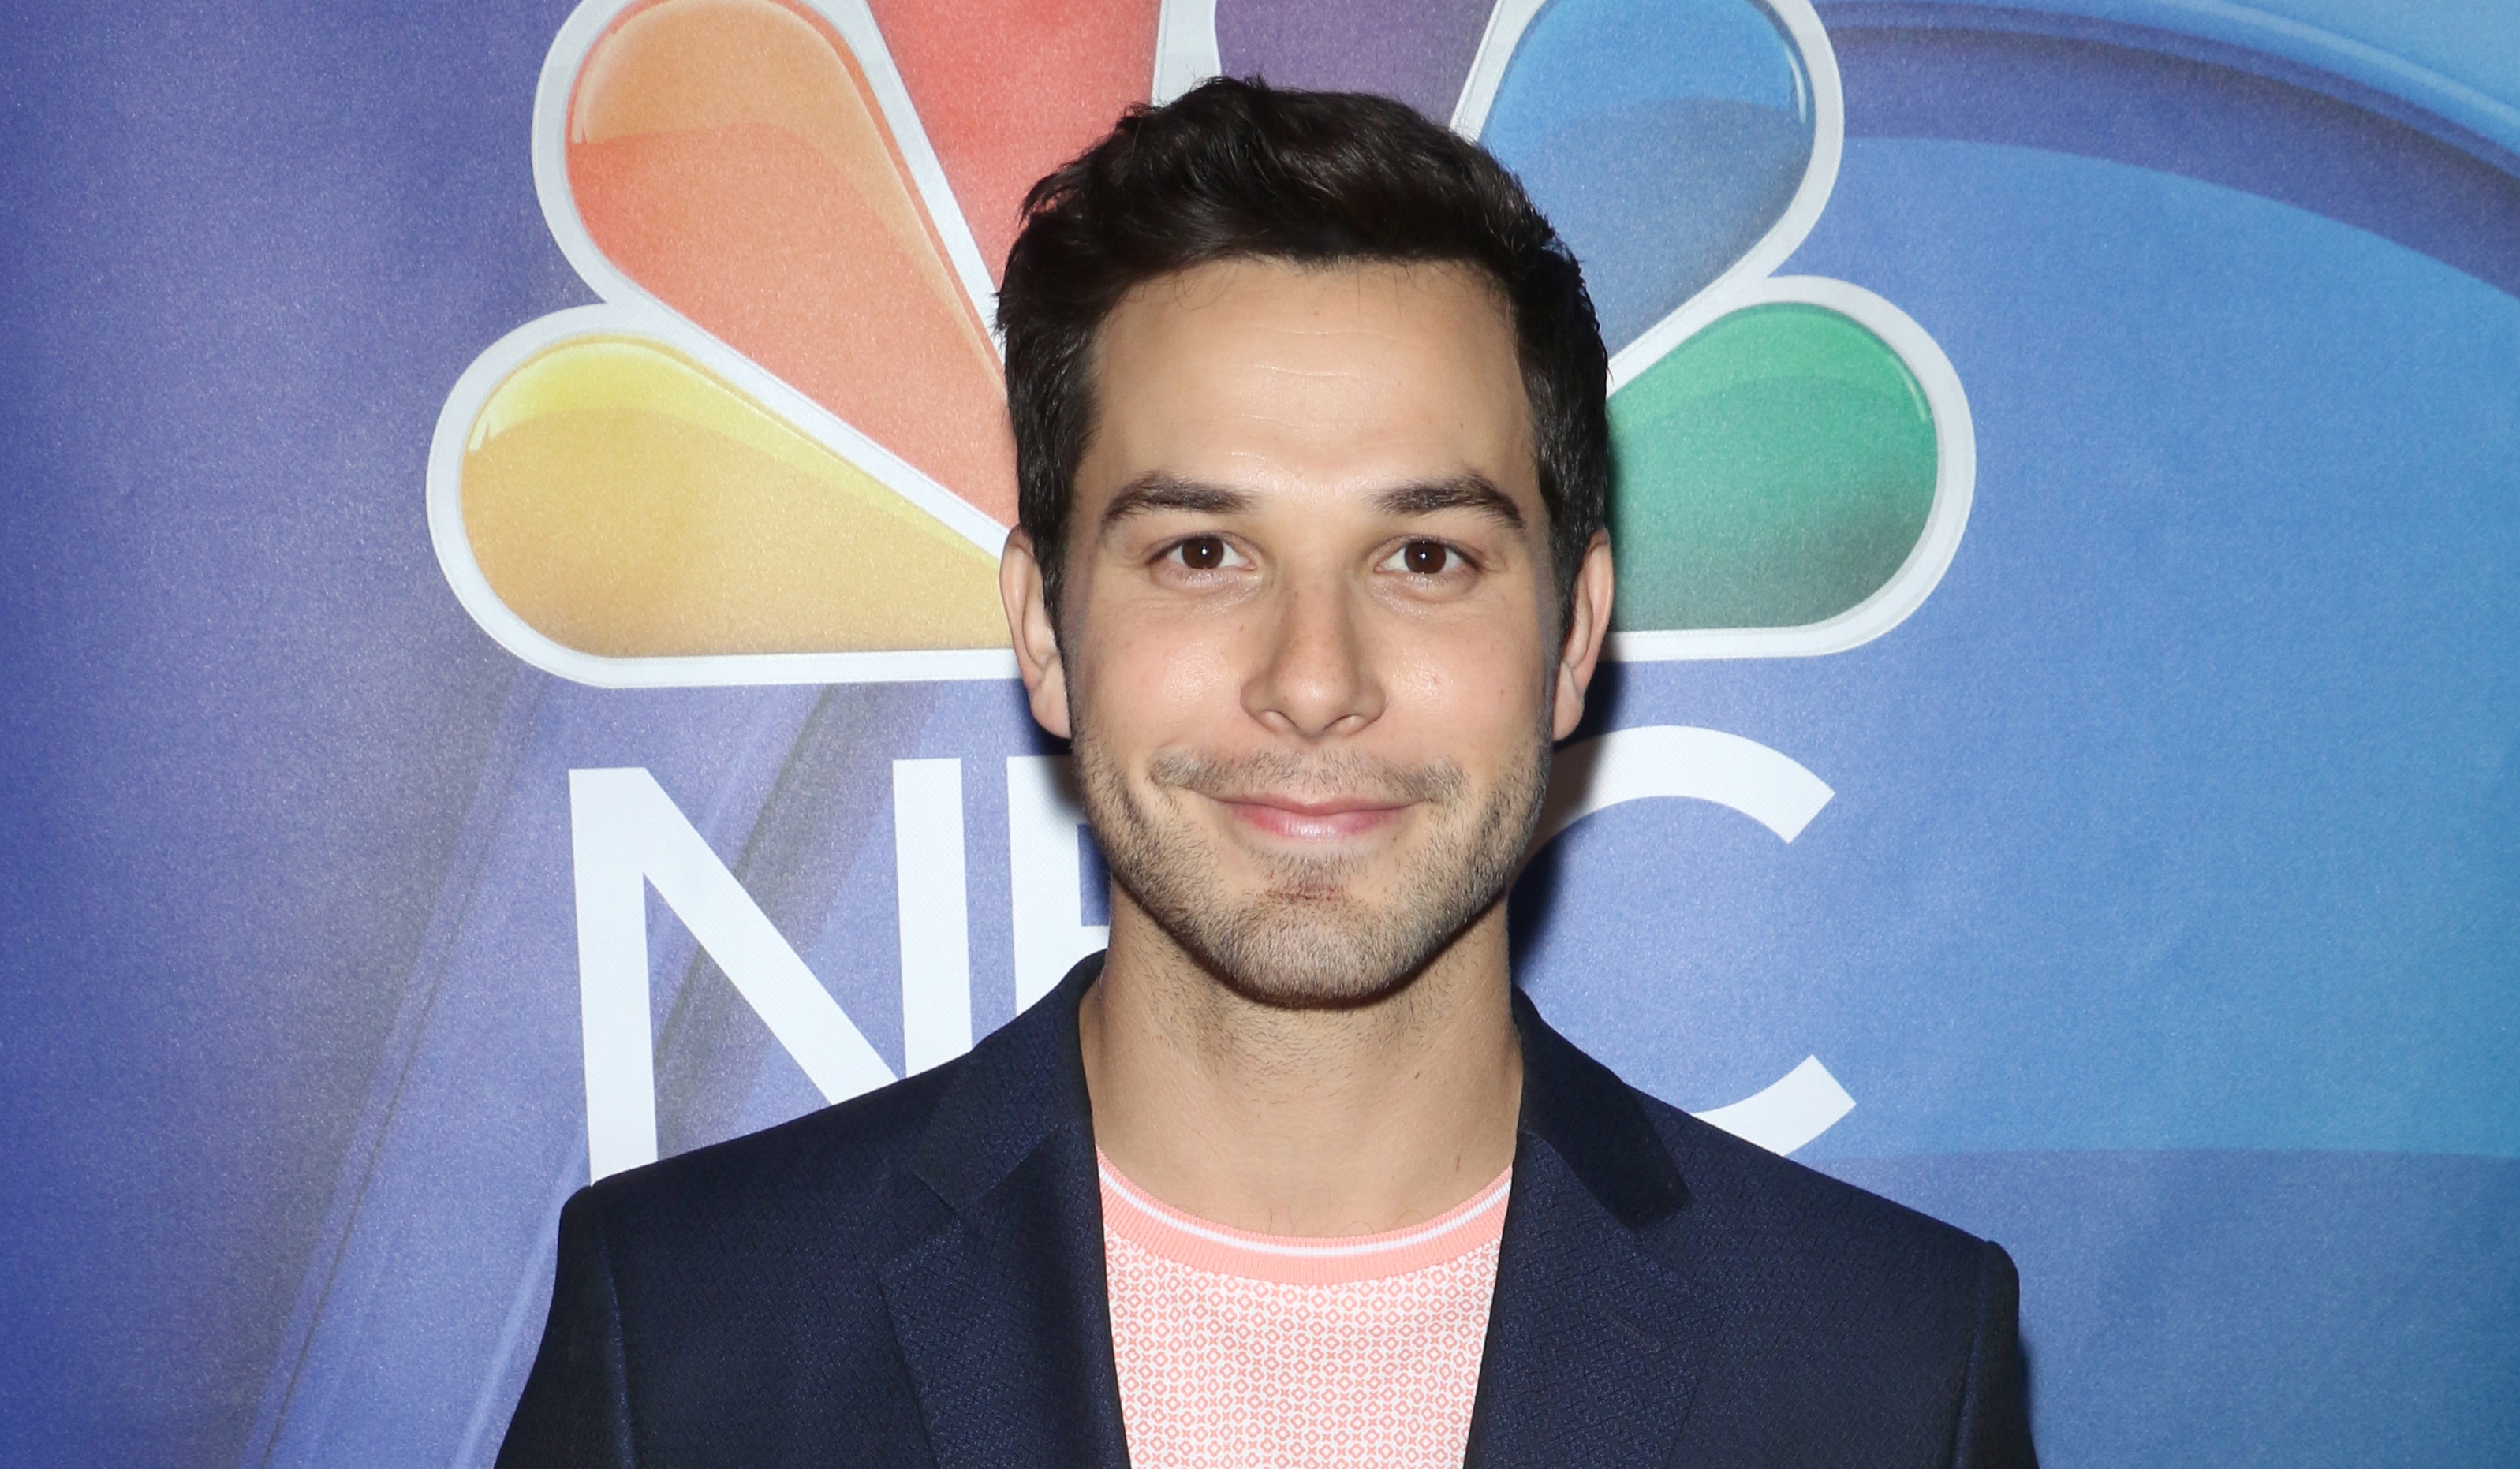 Skylar Astin reveals he once auditioned for 'Glee'